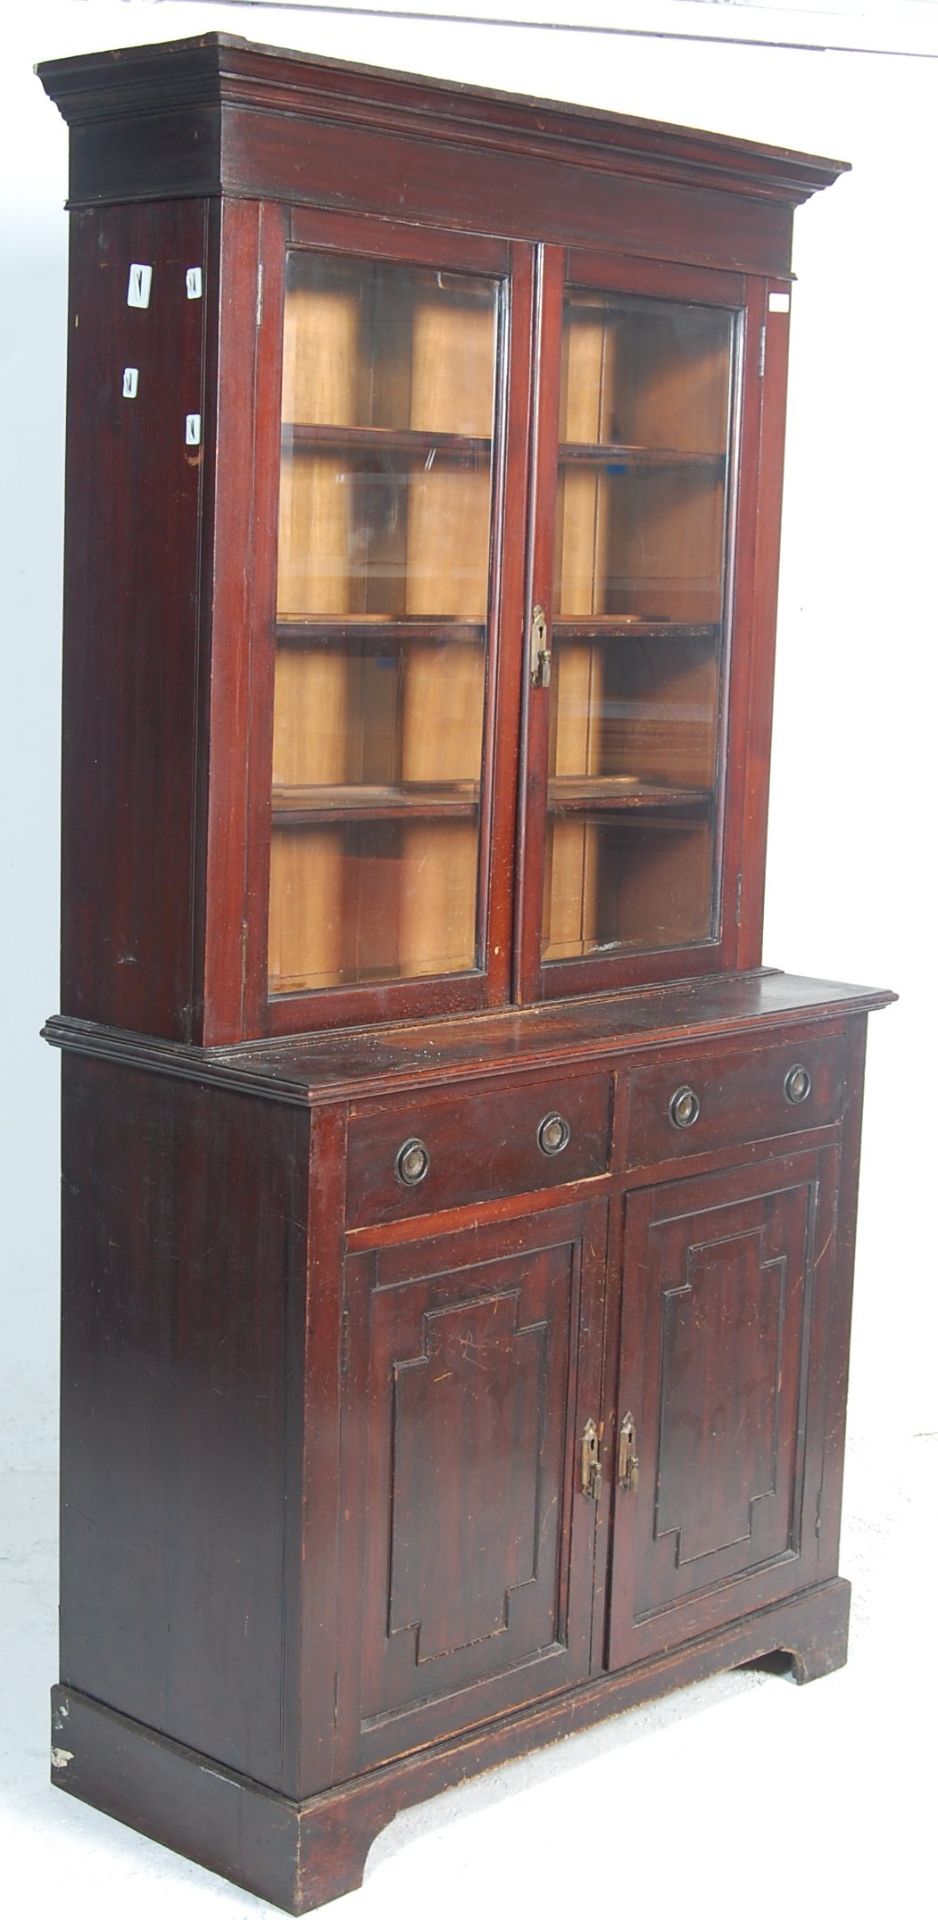 A Victorian 19th century oak library bookcase cabinet. The bookcase raised on plinth base with